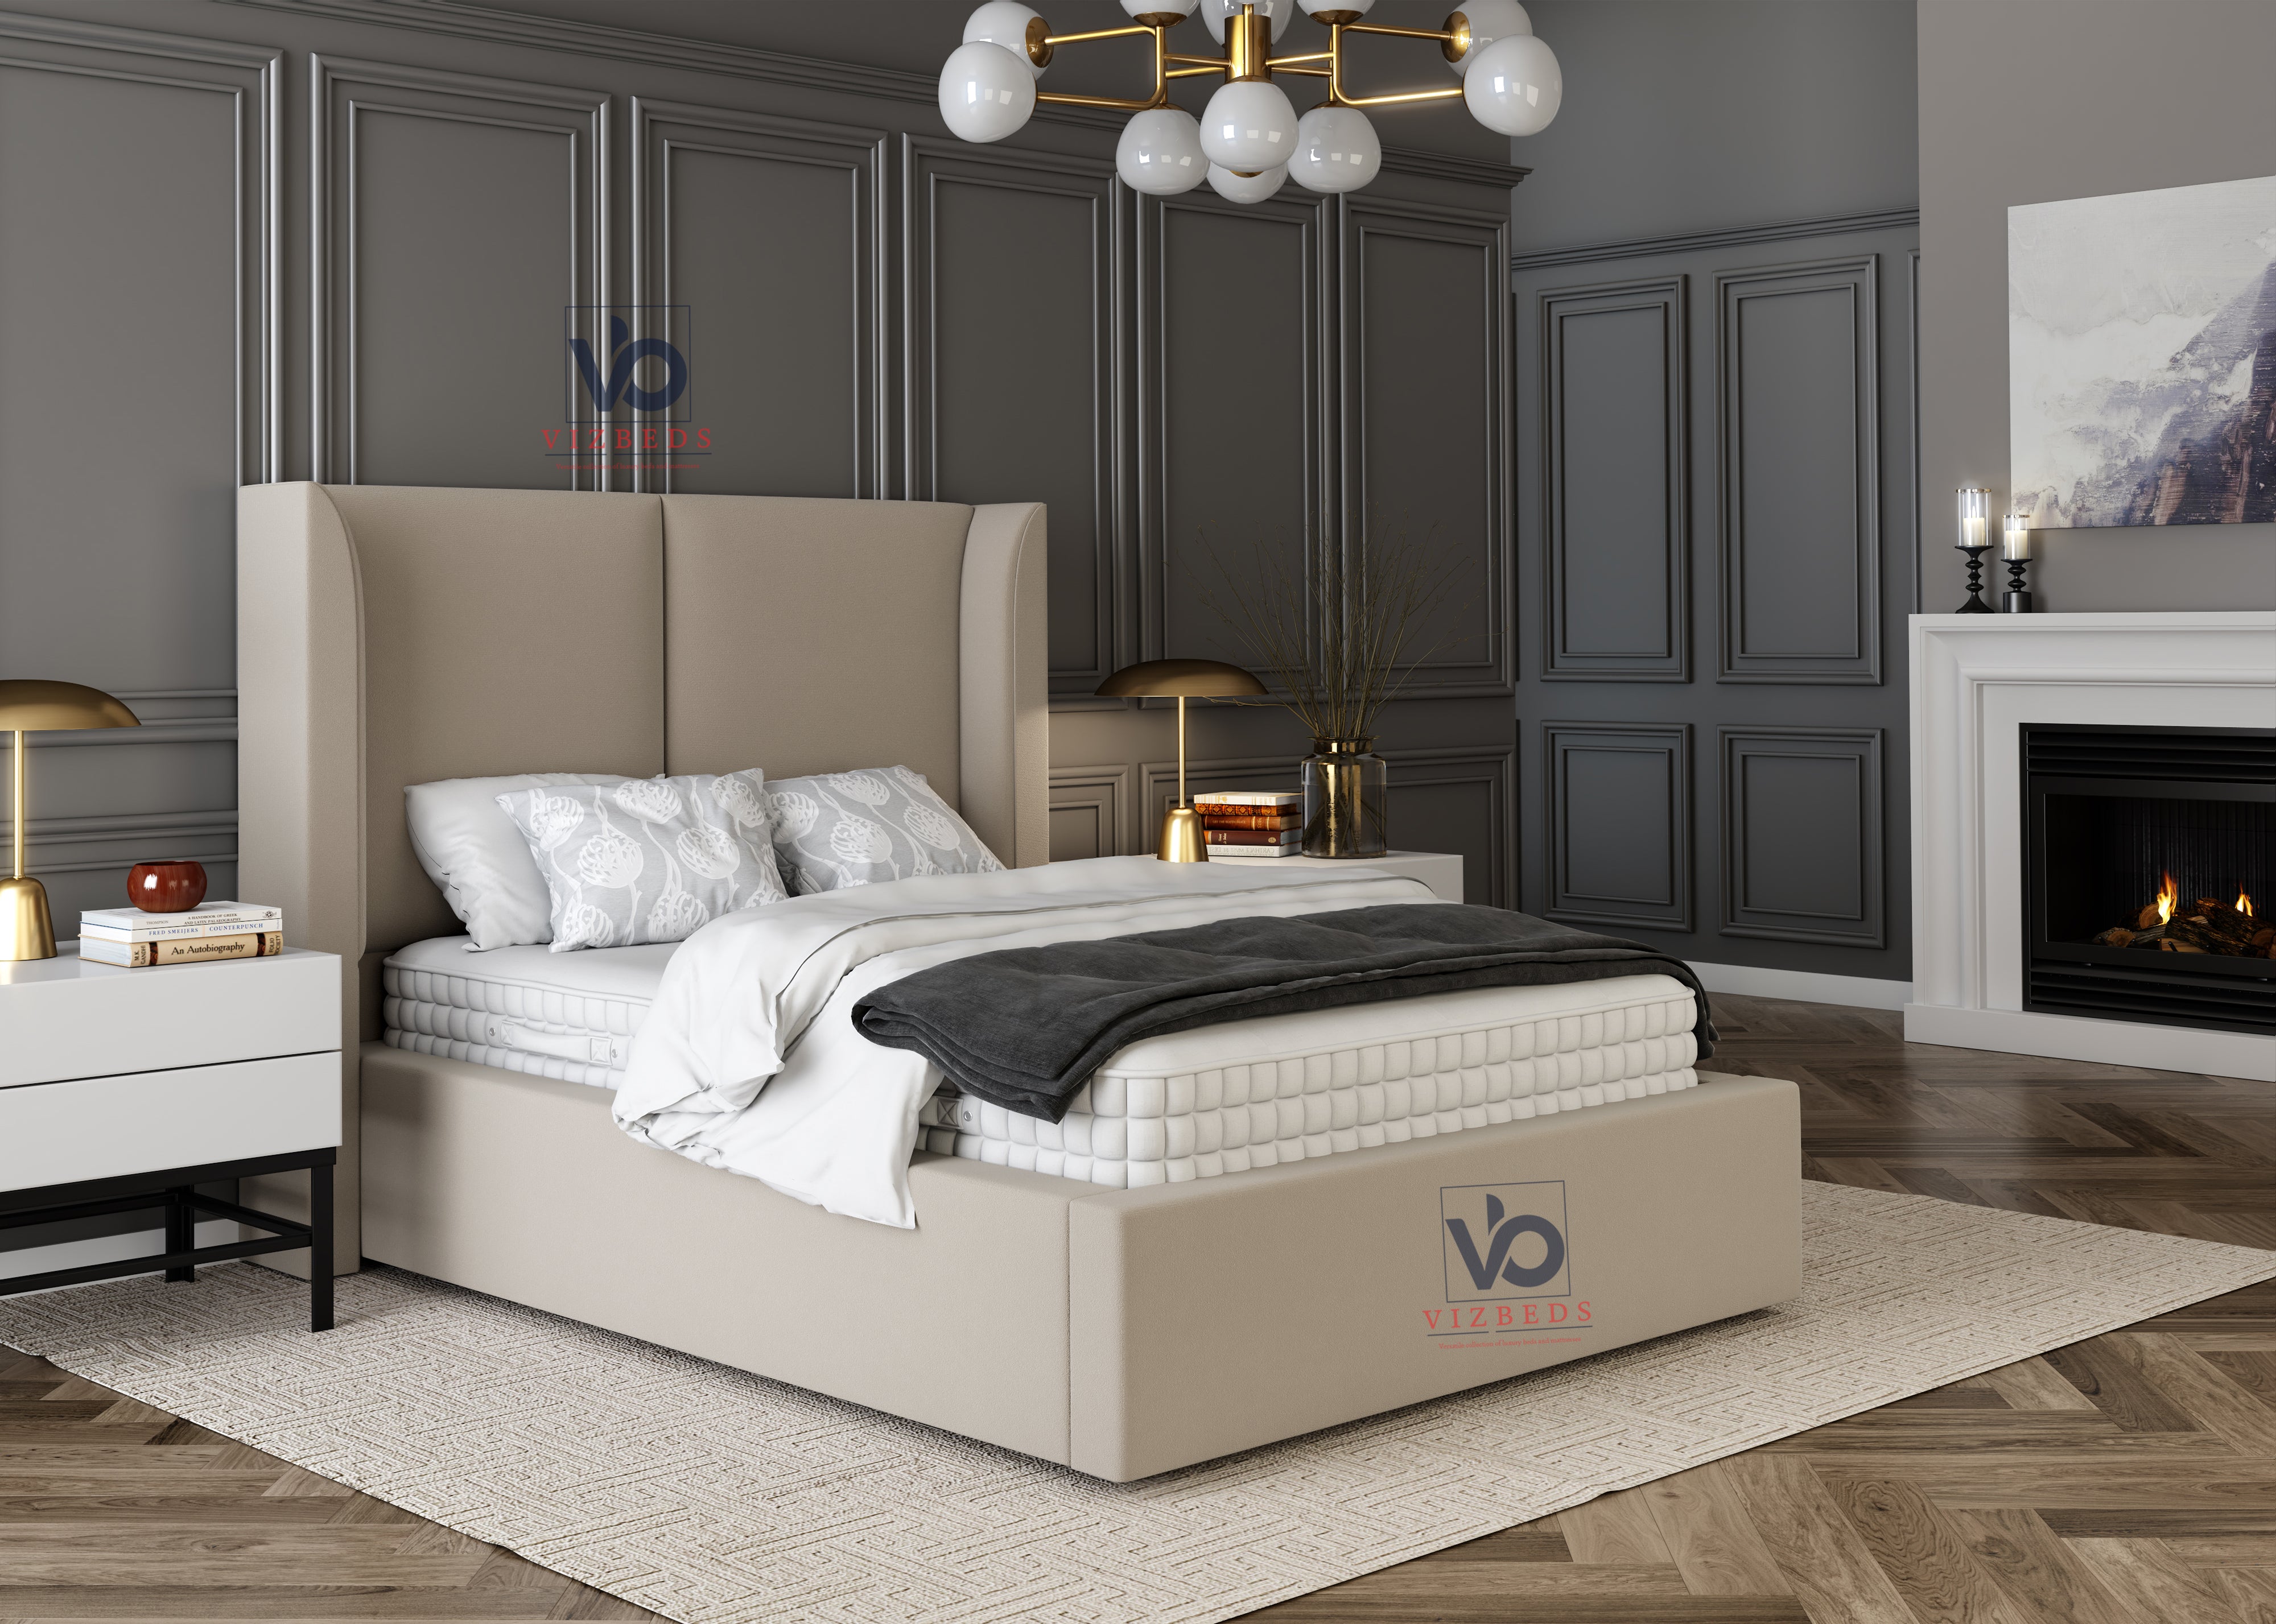 The 2Panel Wing Bed Frame With Luxury Headboard